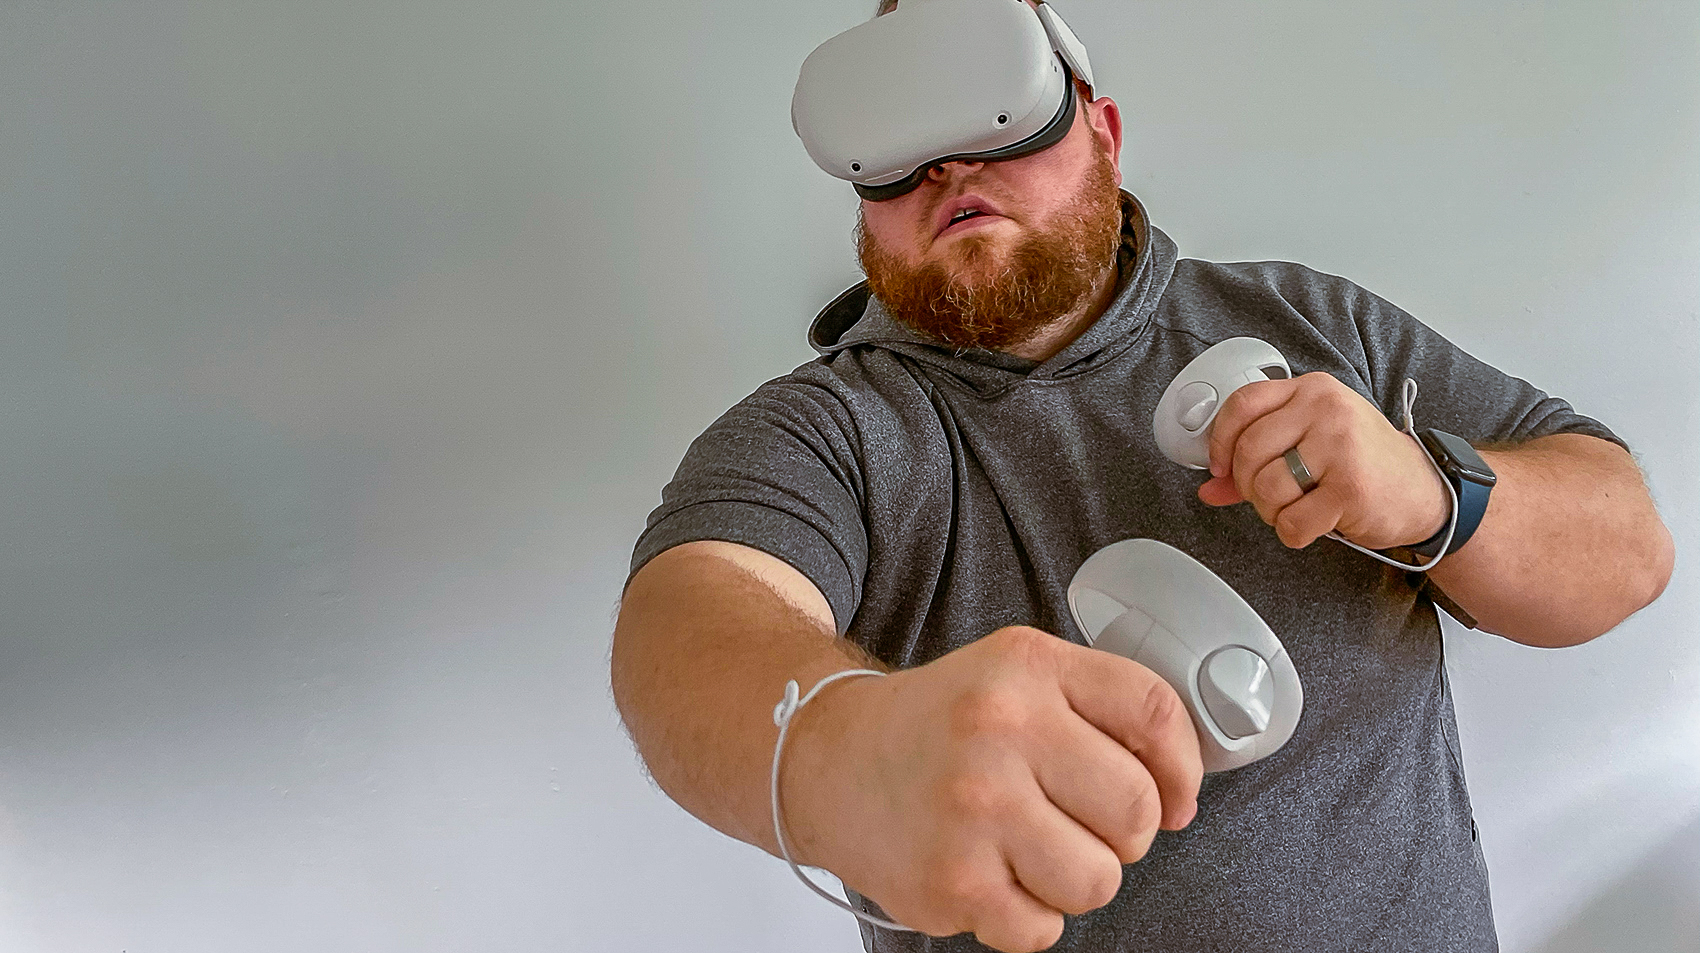 Liteboxer VR Big Guy Workout Review